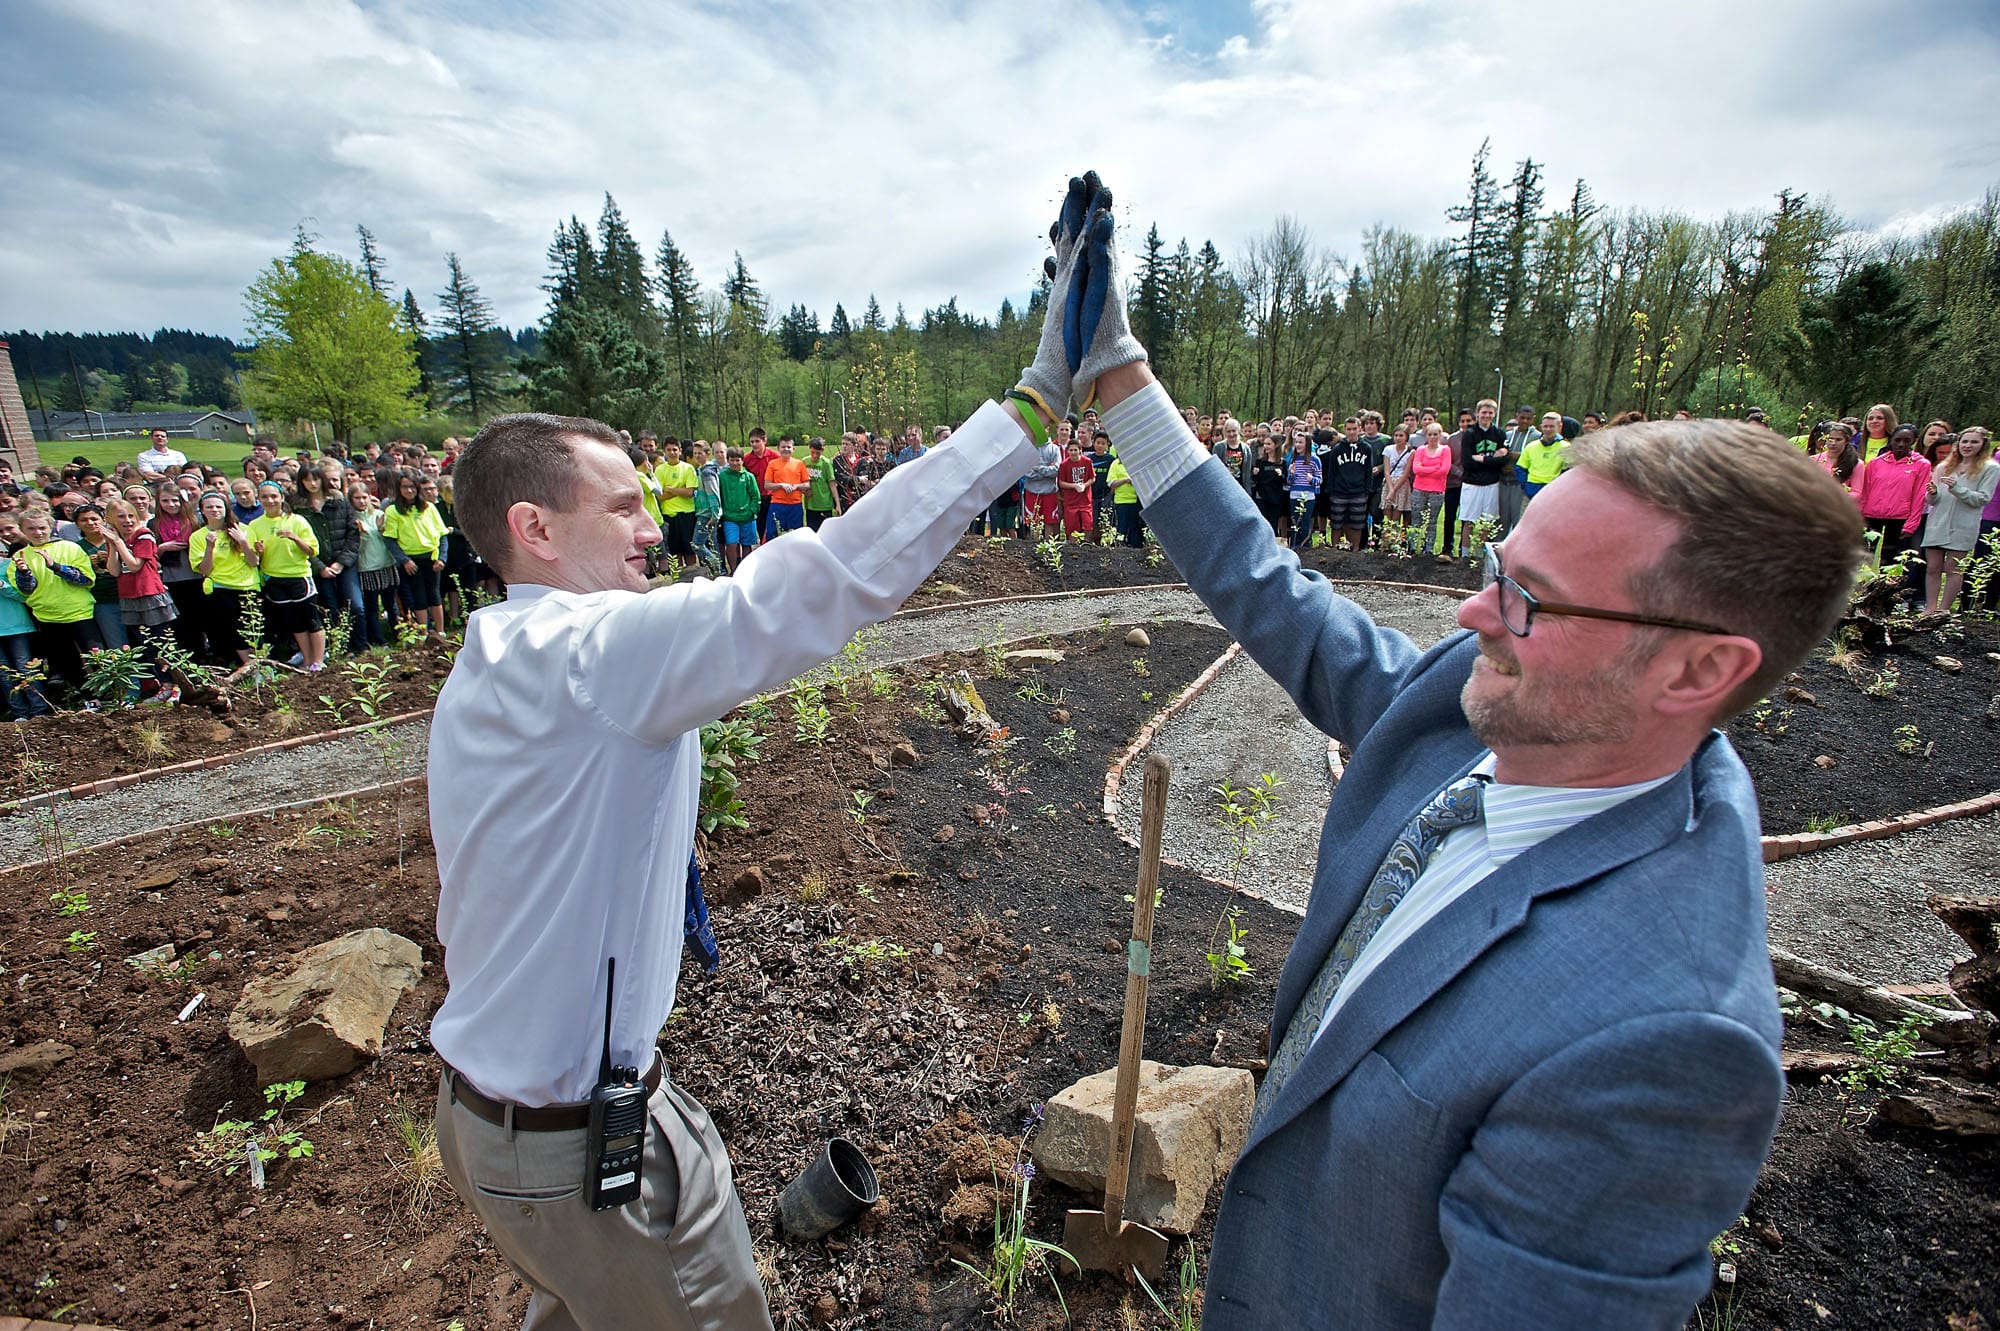 Skyridge Middle School Associate Principal Clint Williams, left, and Principal Aaron Smith give each other a high-five Tuesday after planting two camas lilies, signifying the completion of the Skyridge Lewis and Clark native plant garden, during a ceremony coinciding with Earth Day.